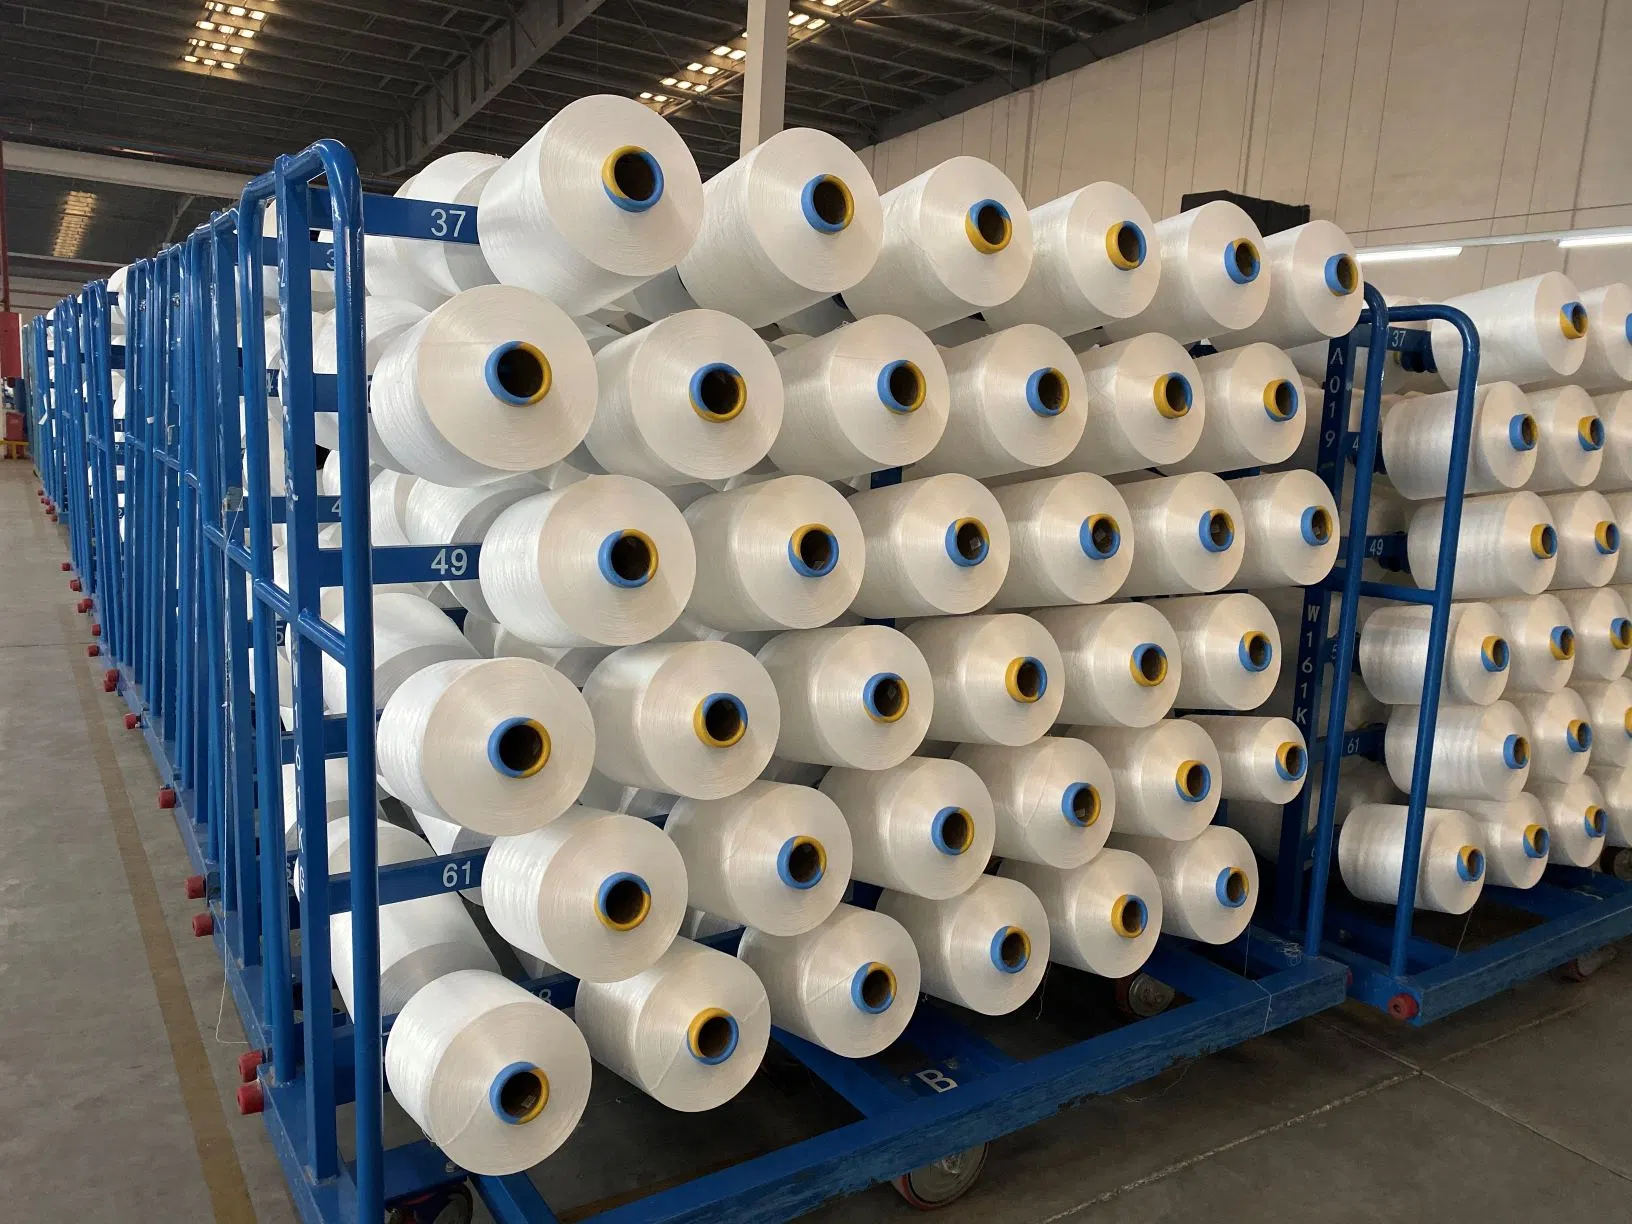 Chinese Manufacture Polyester Yarn 100% Recycled Polyester Nim SD Spadnex Filament Yarn DTY 75D/48f Yarn for Knittingaa Grade 100% Recycled Polyester Yarn Prof